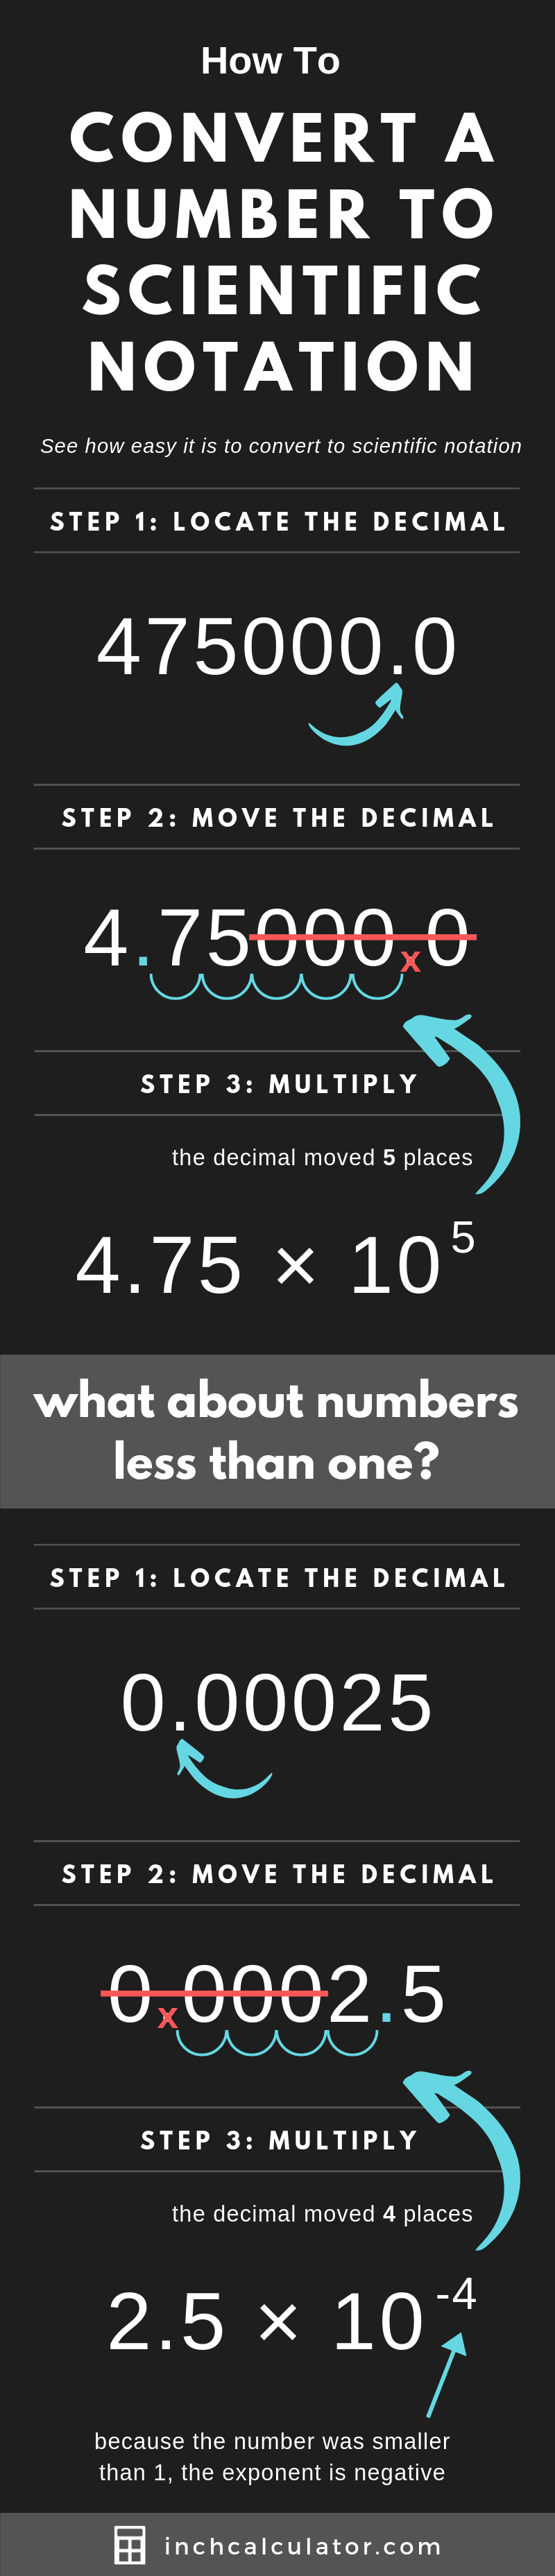 infographic showing how to convert a number into scientific notation